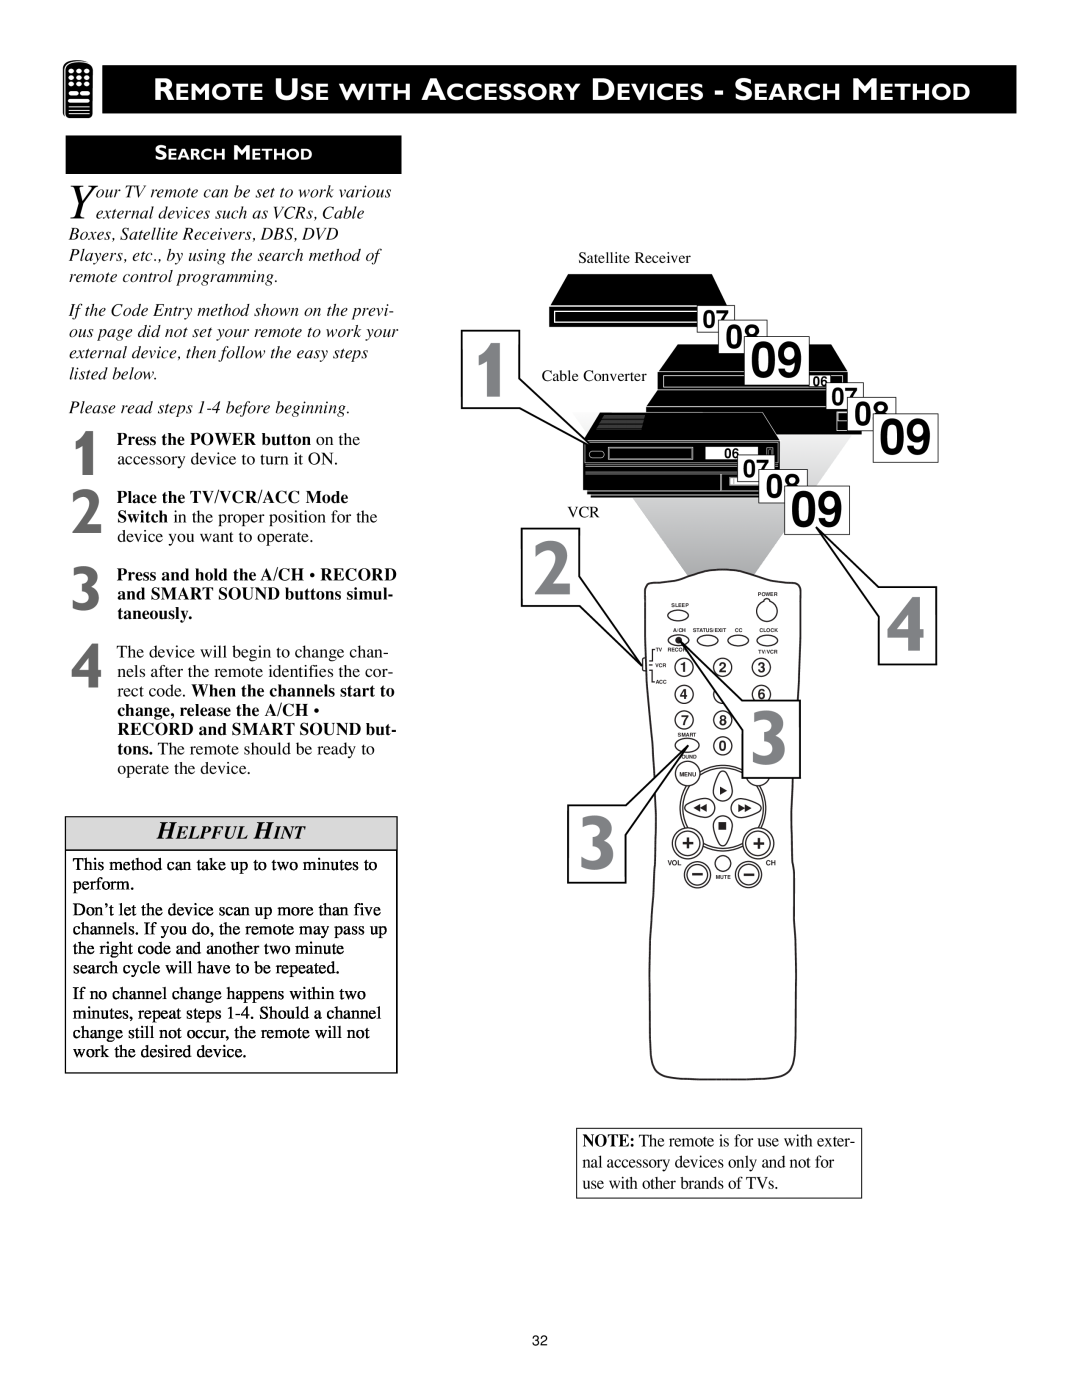 Magnavox MS3252S MS3652S owner manual Remote Use With, Accessory Devices - Search Method, 0708, Helpful Hint 